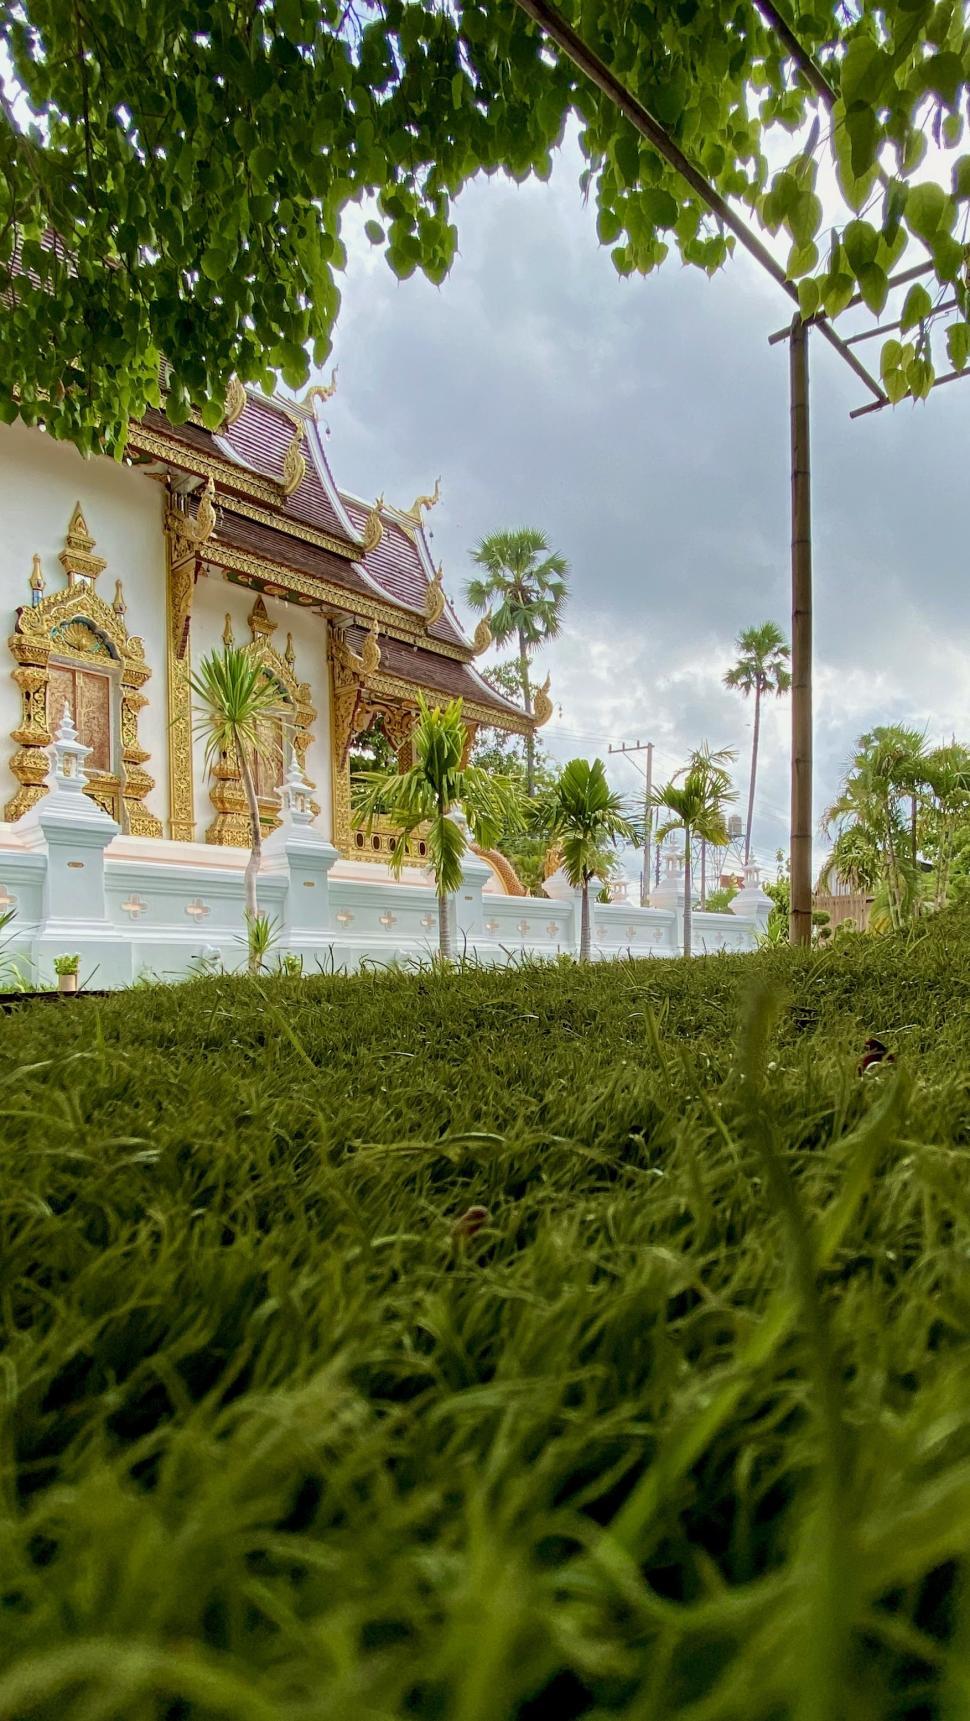 Free Image of Temple on the Grass 